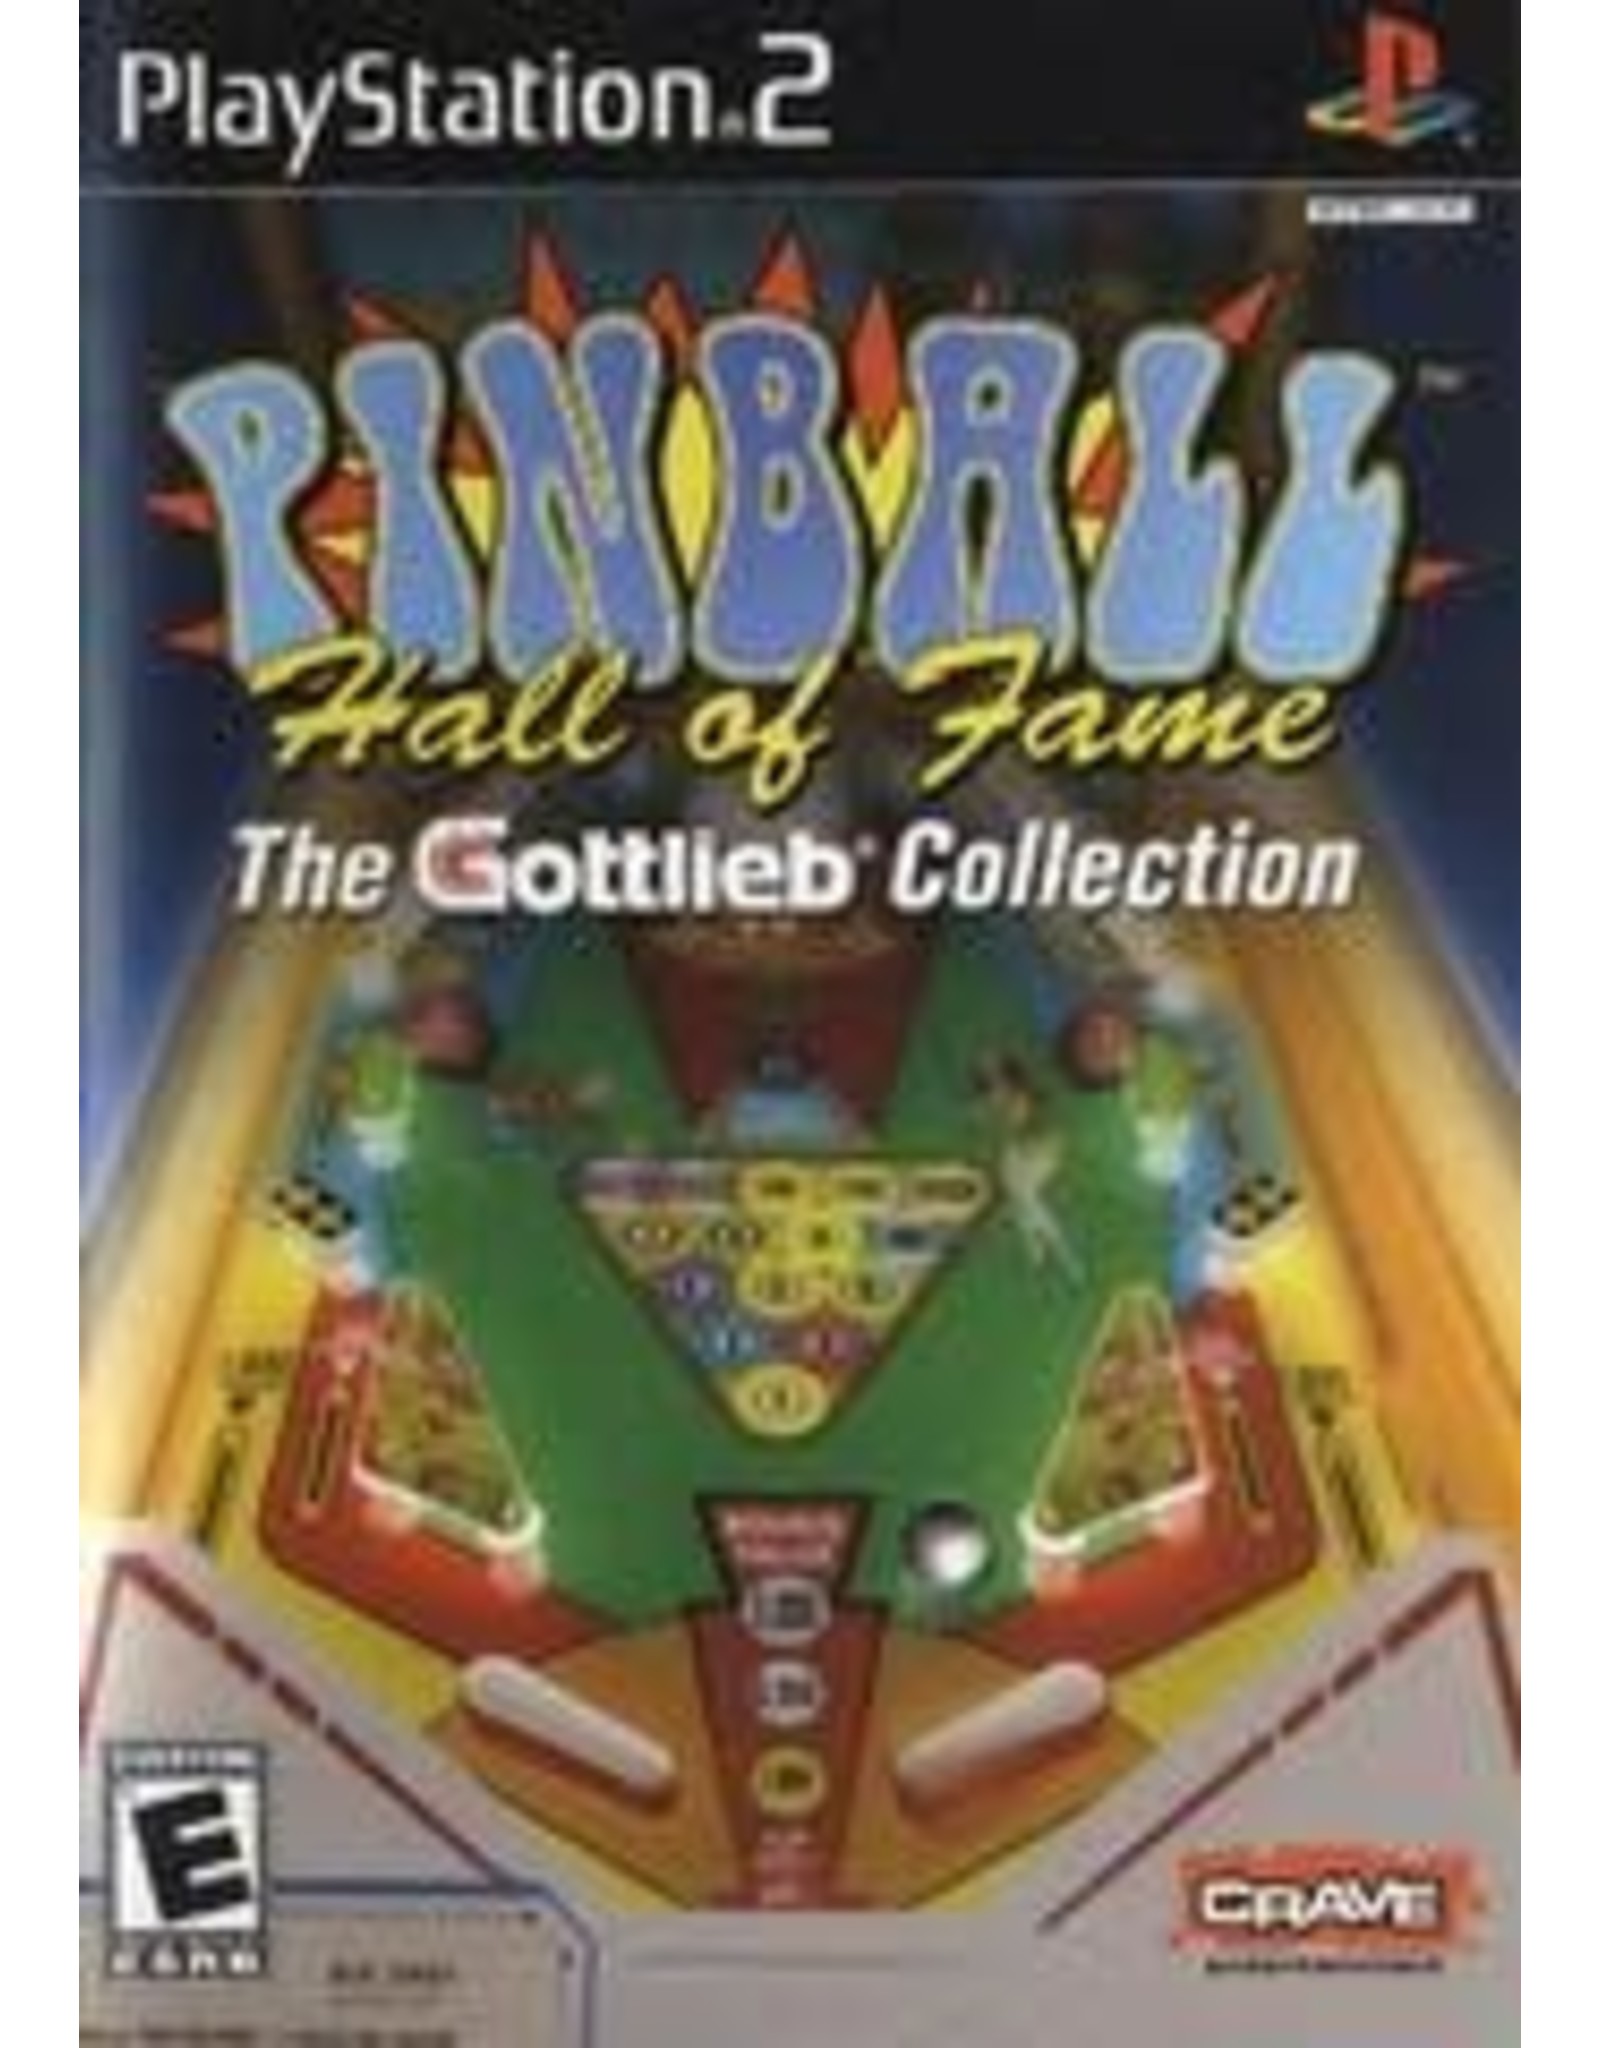 Playstation 2 Pinball Hall of Fame The Gottlieb Collection (Used)